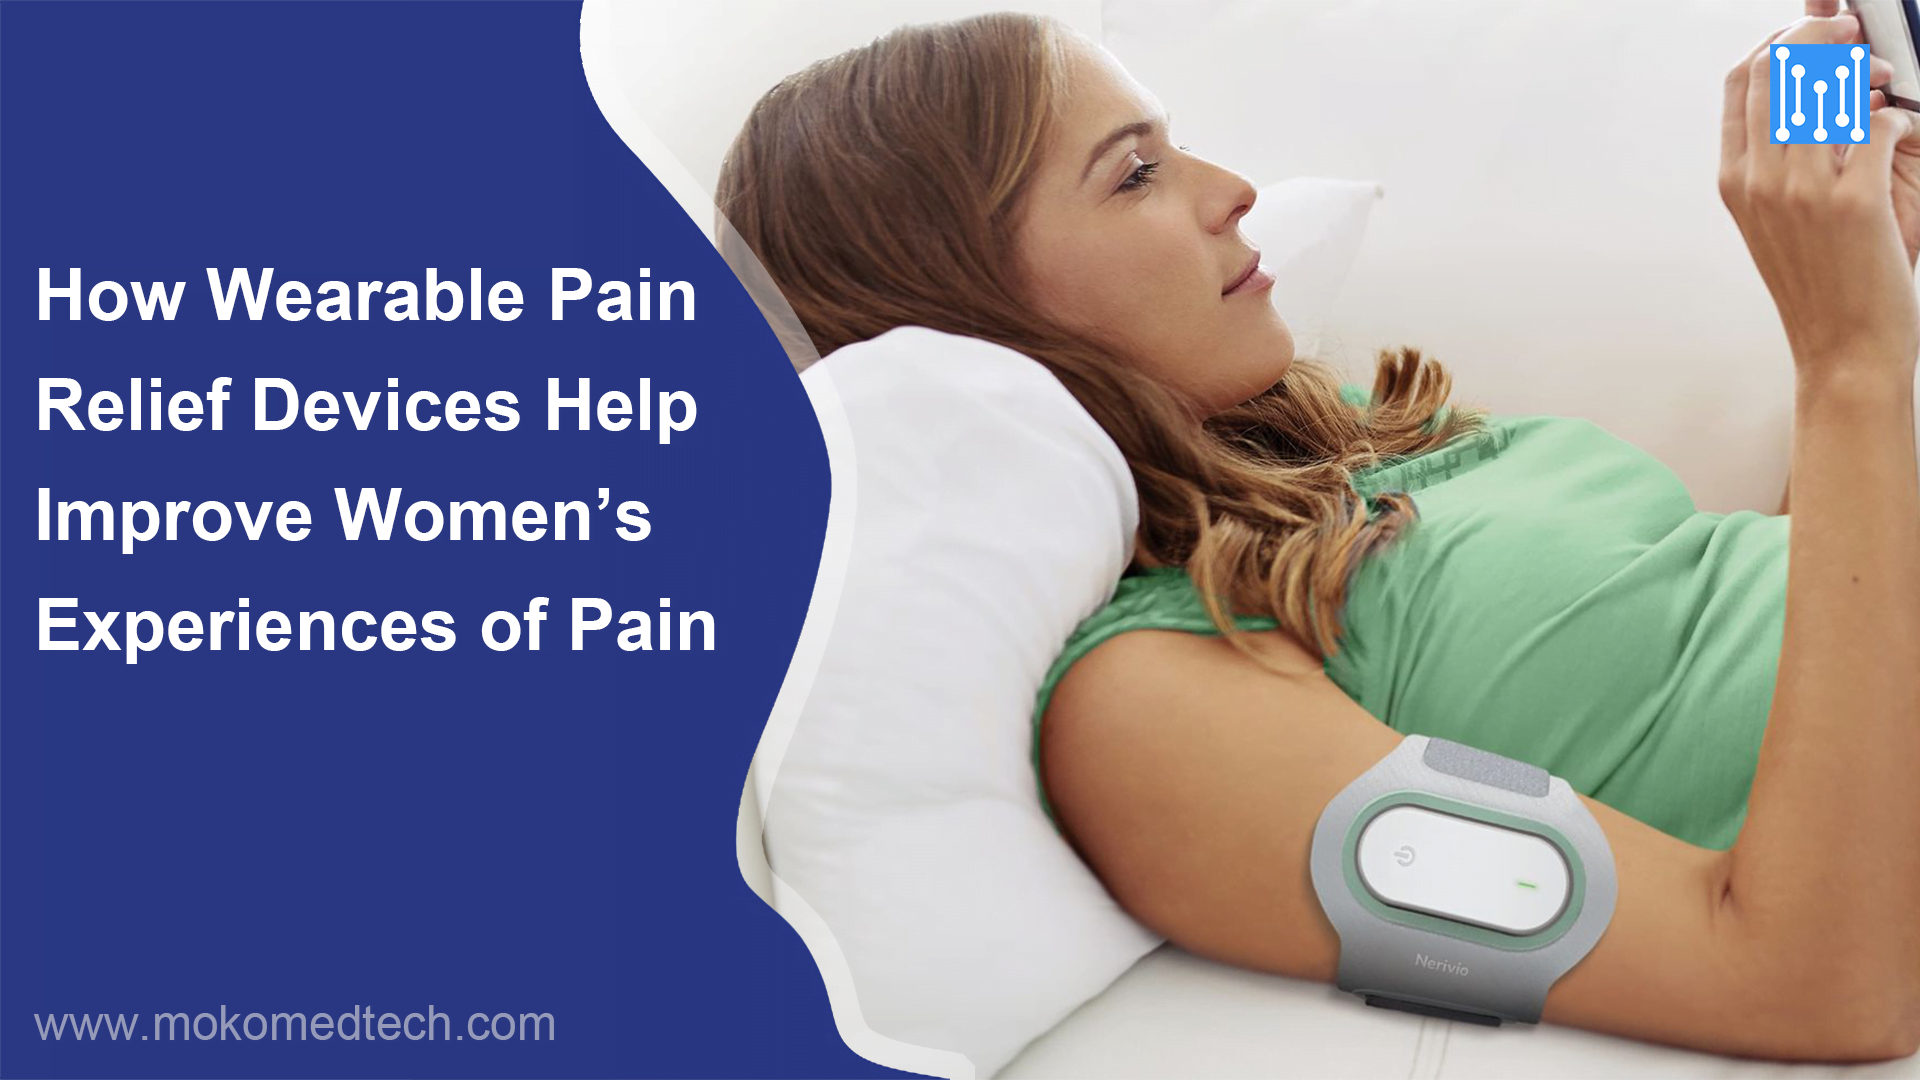 How Wearable Pain Relief Devices Help Improve Women’s Experiences of Pain